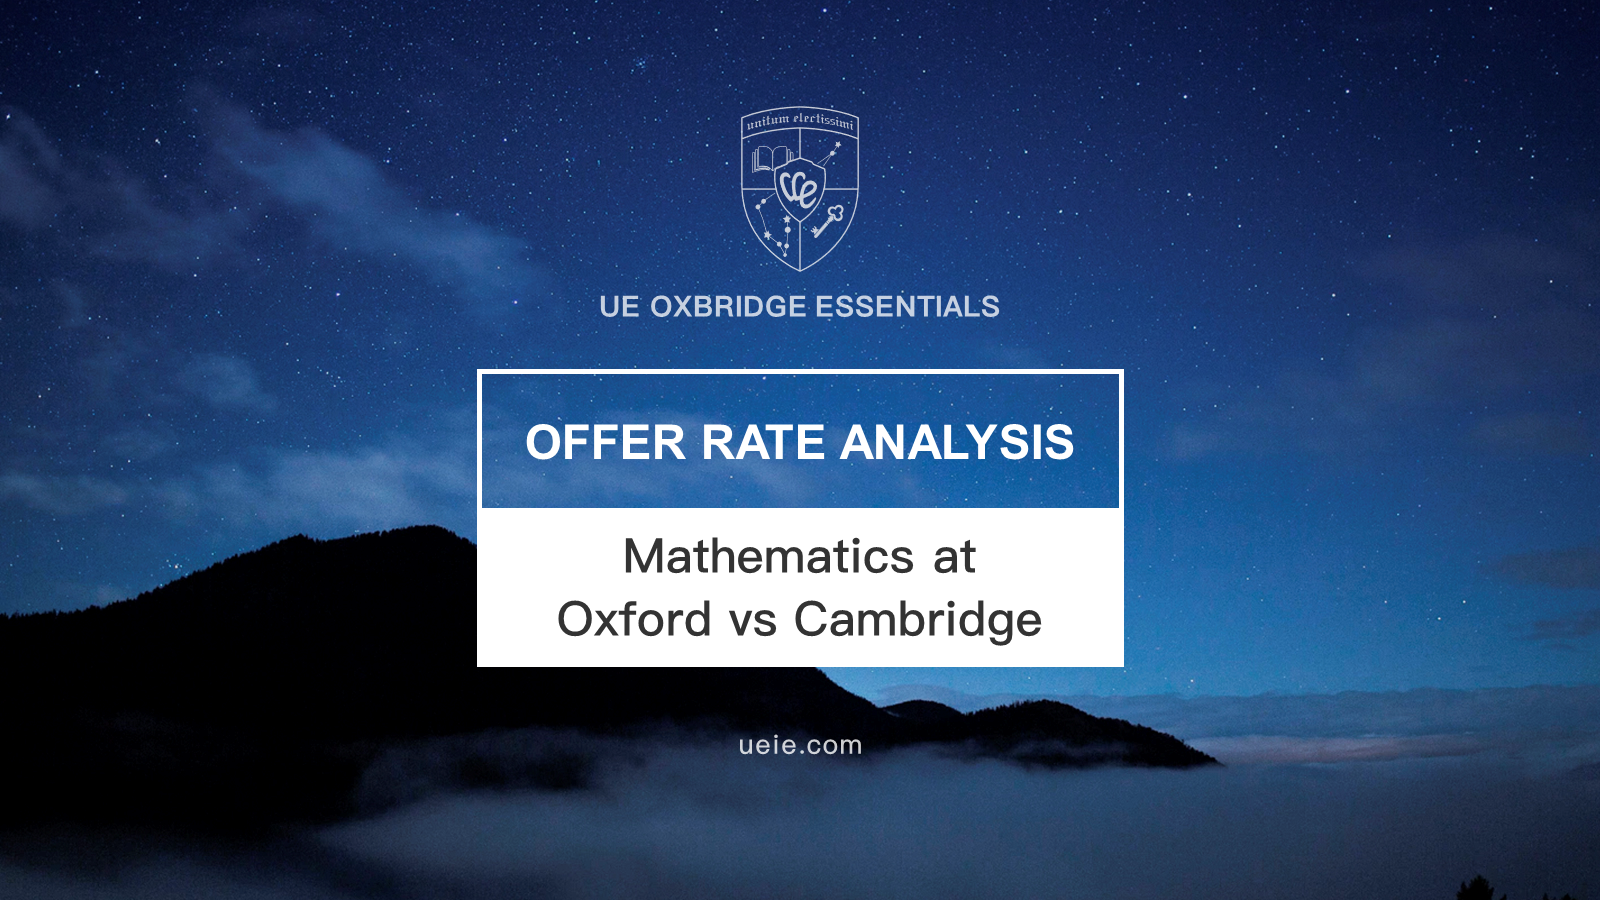 Mathematics at Oxford and Cambridge Offer Rates Analysis